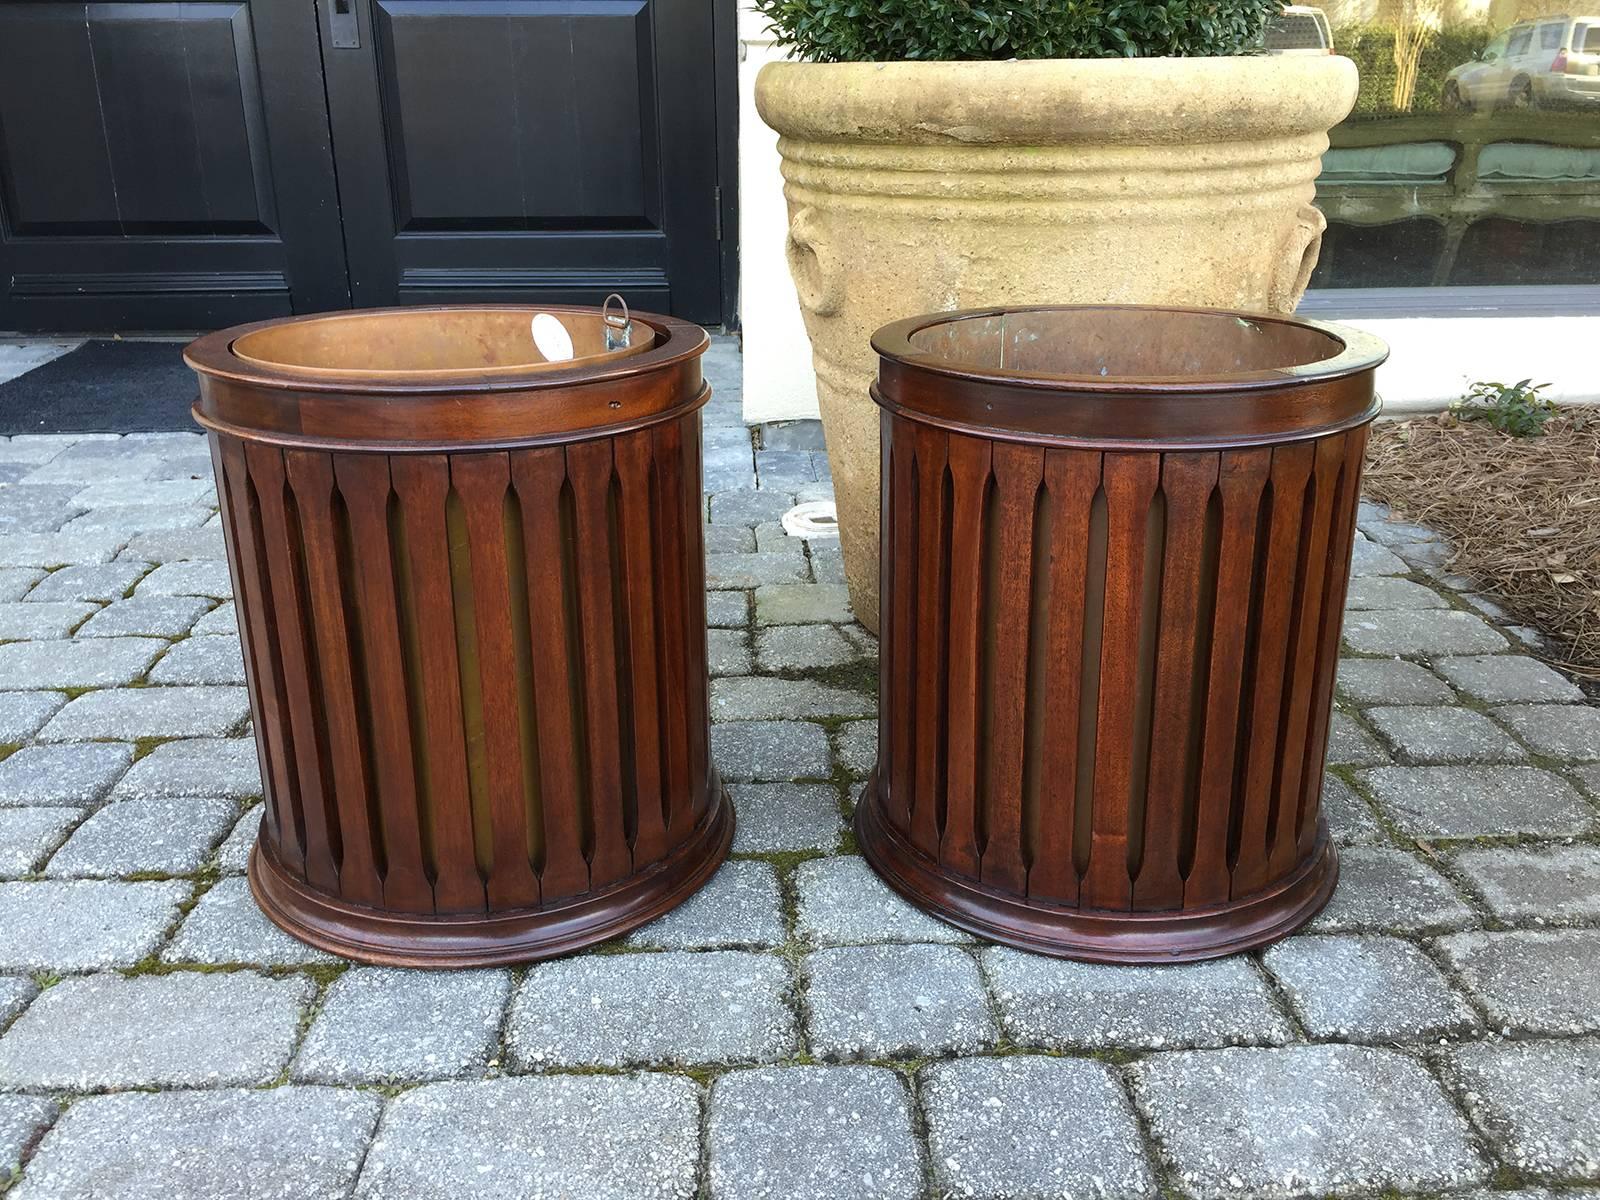 Pair of 19th century copper lined English mahogany buckets in the style of George III.